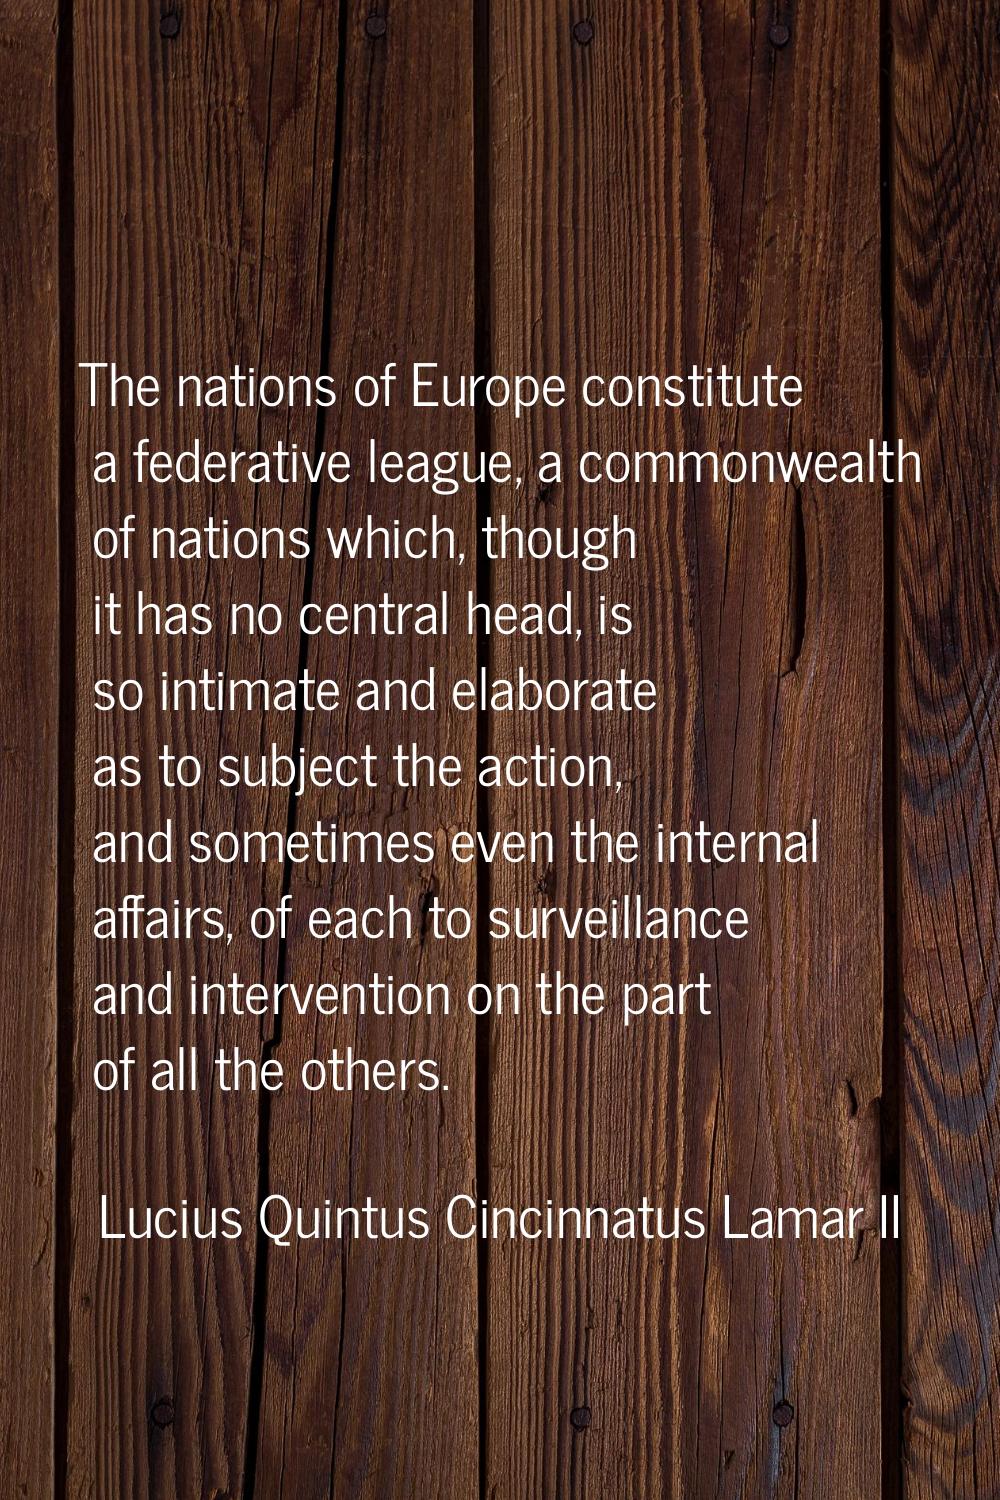 The nations of Europe constitute a federative league, a commonwealth of nations which, though it ha